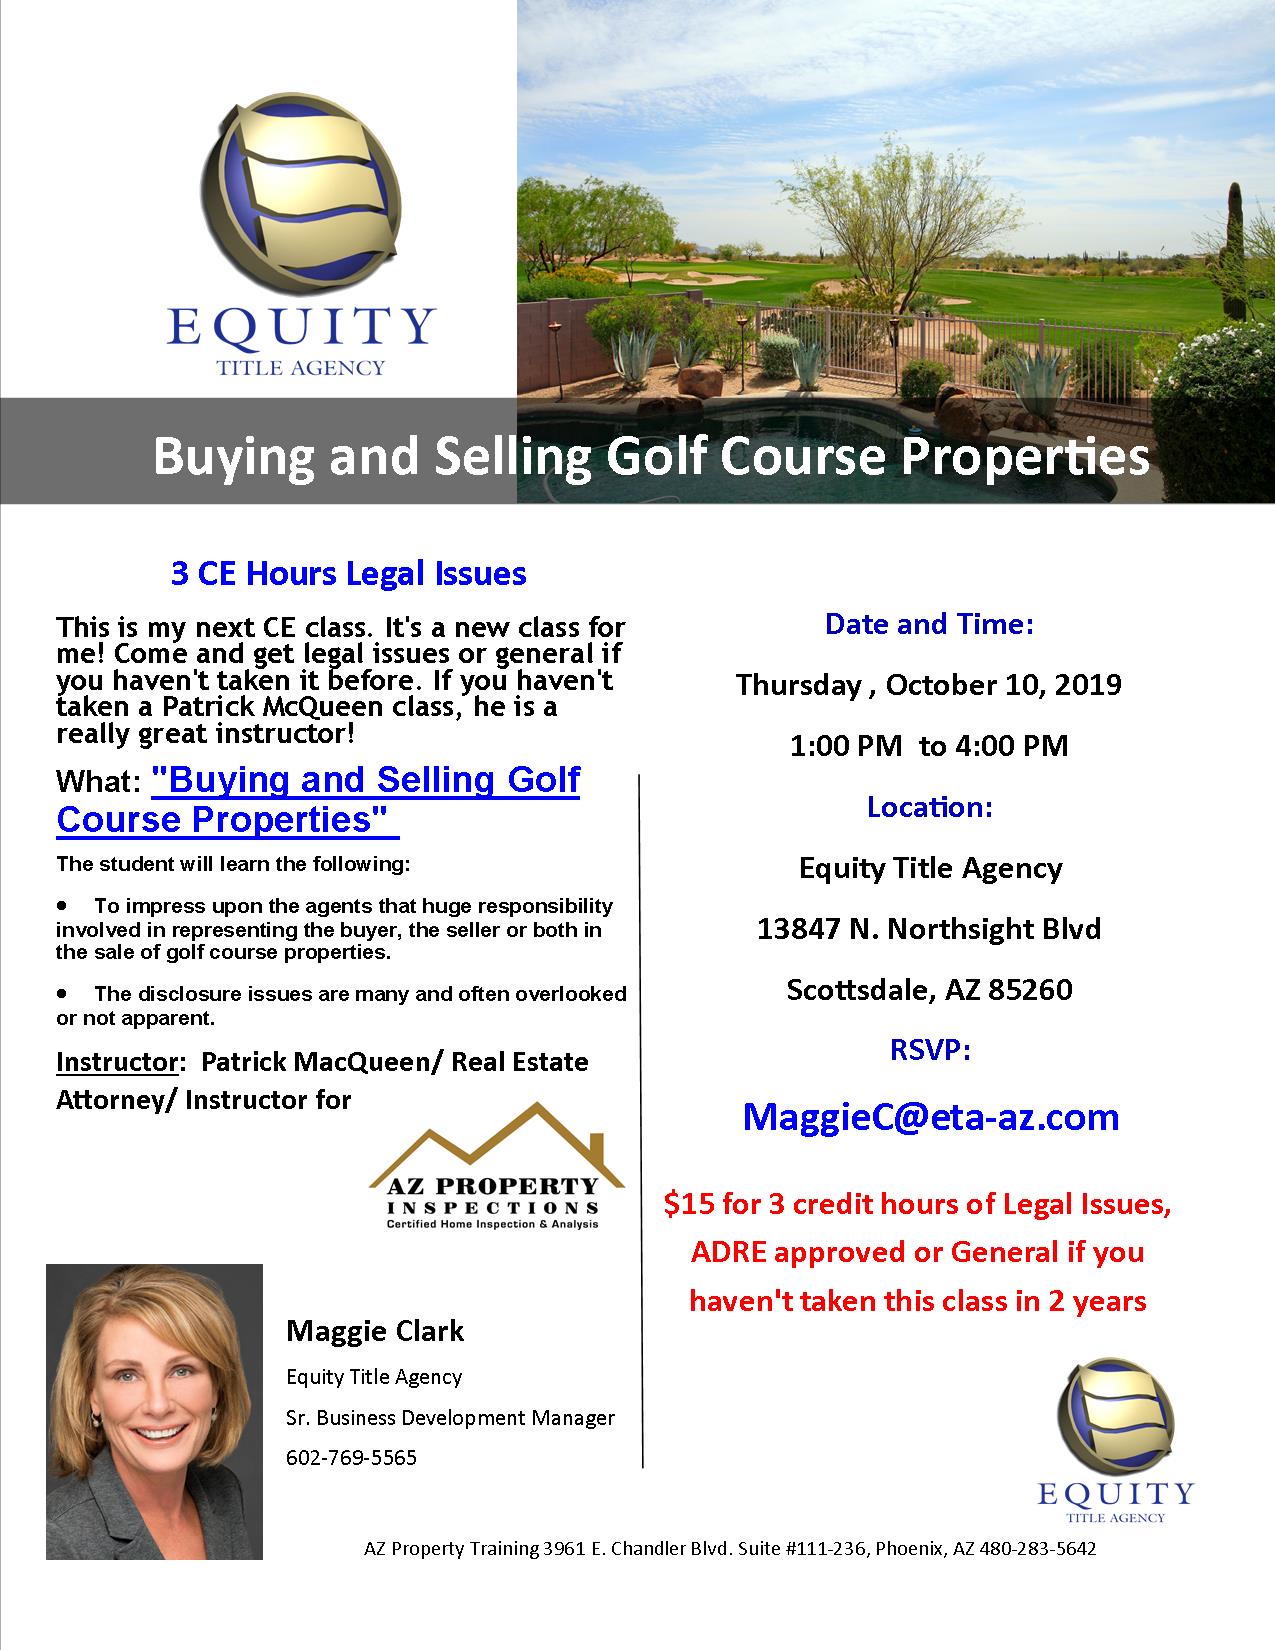 Buying and Selling Golf Course Properties